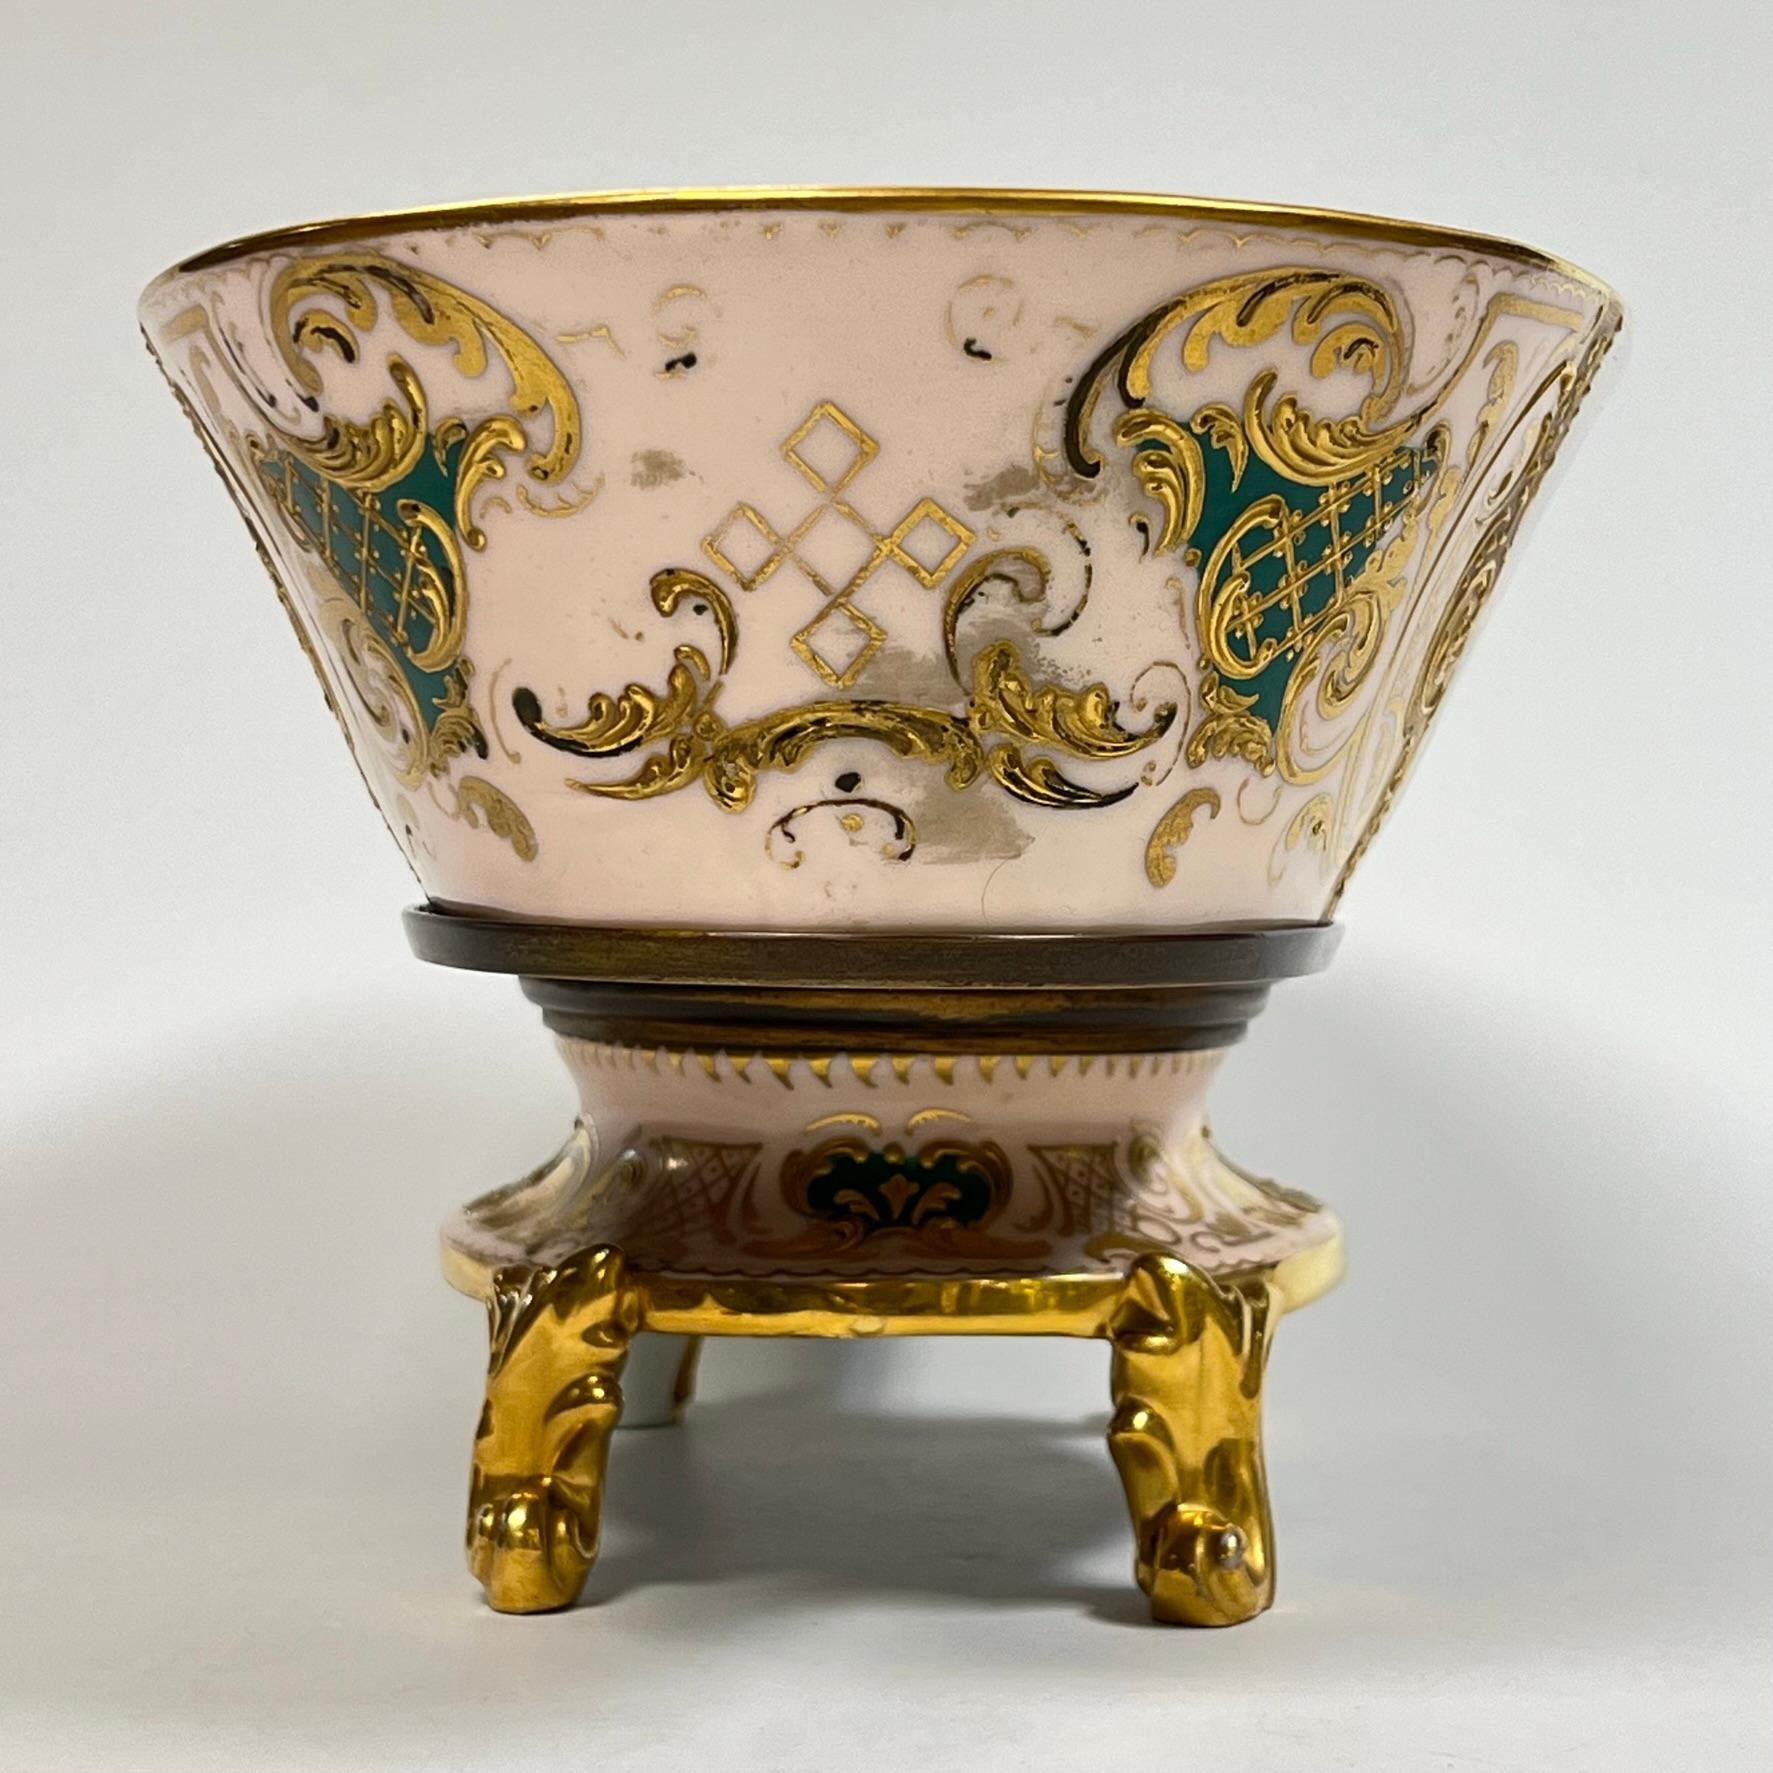 Metal 19th Century Porcelain Centerpiece Bowl / Jardiniere on Stand from Royal Vienna For Sale